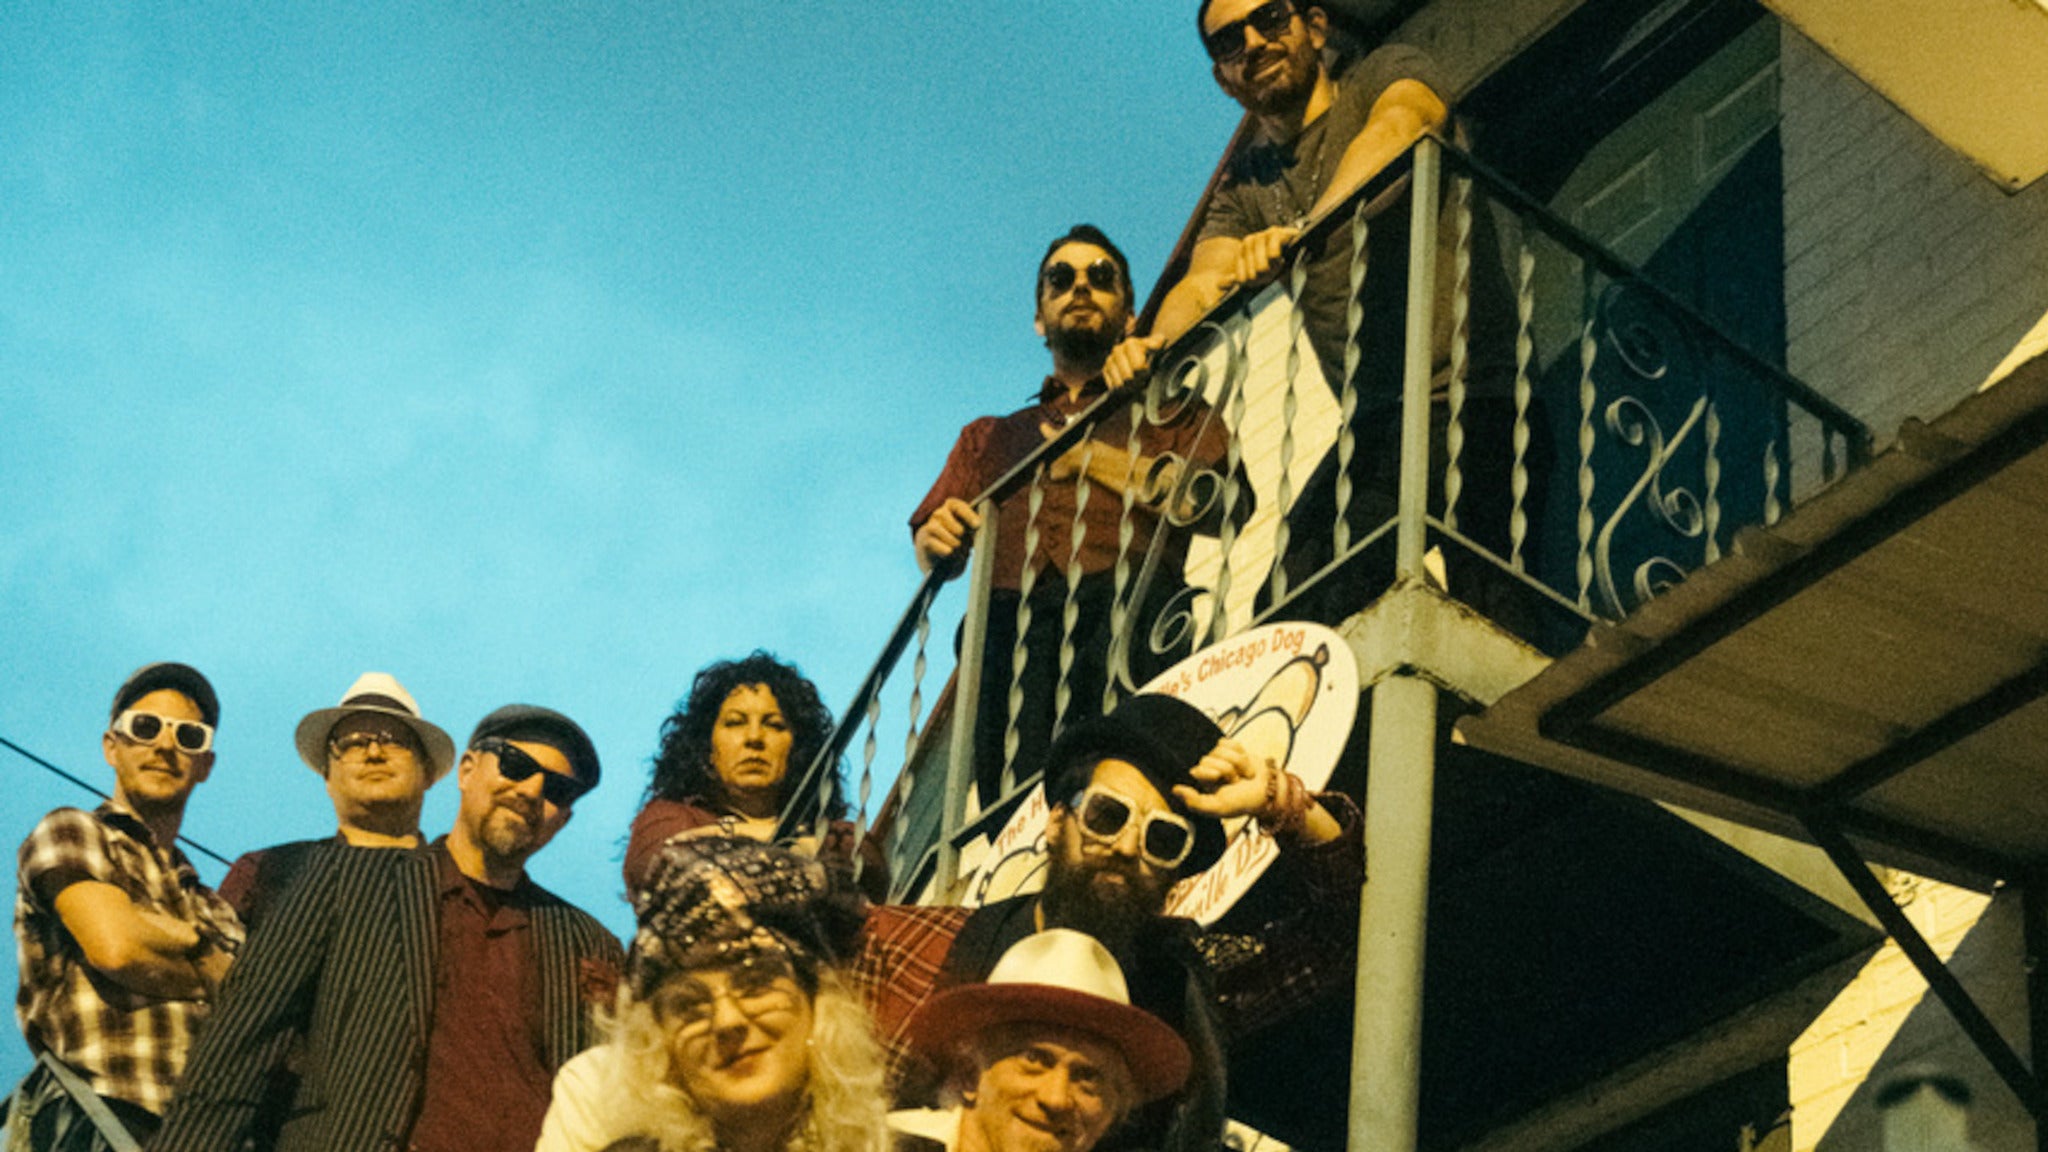 Squirrel Nut Zippers at The Crescent Ballroom